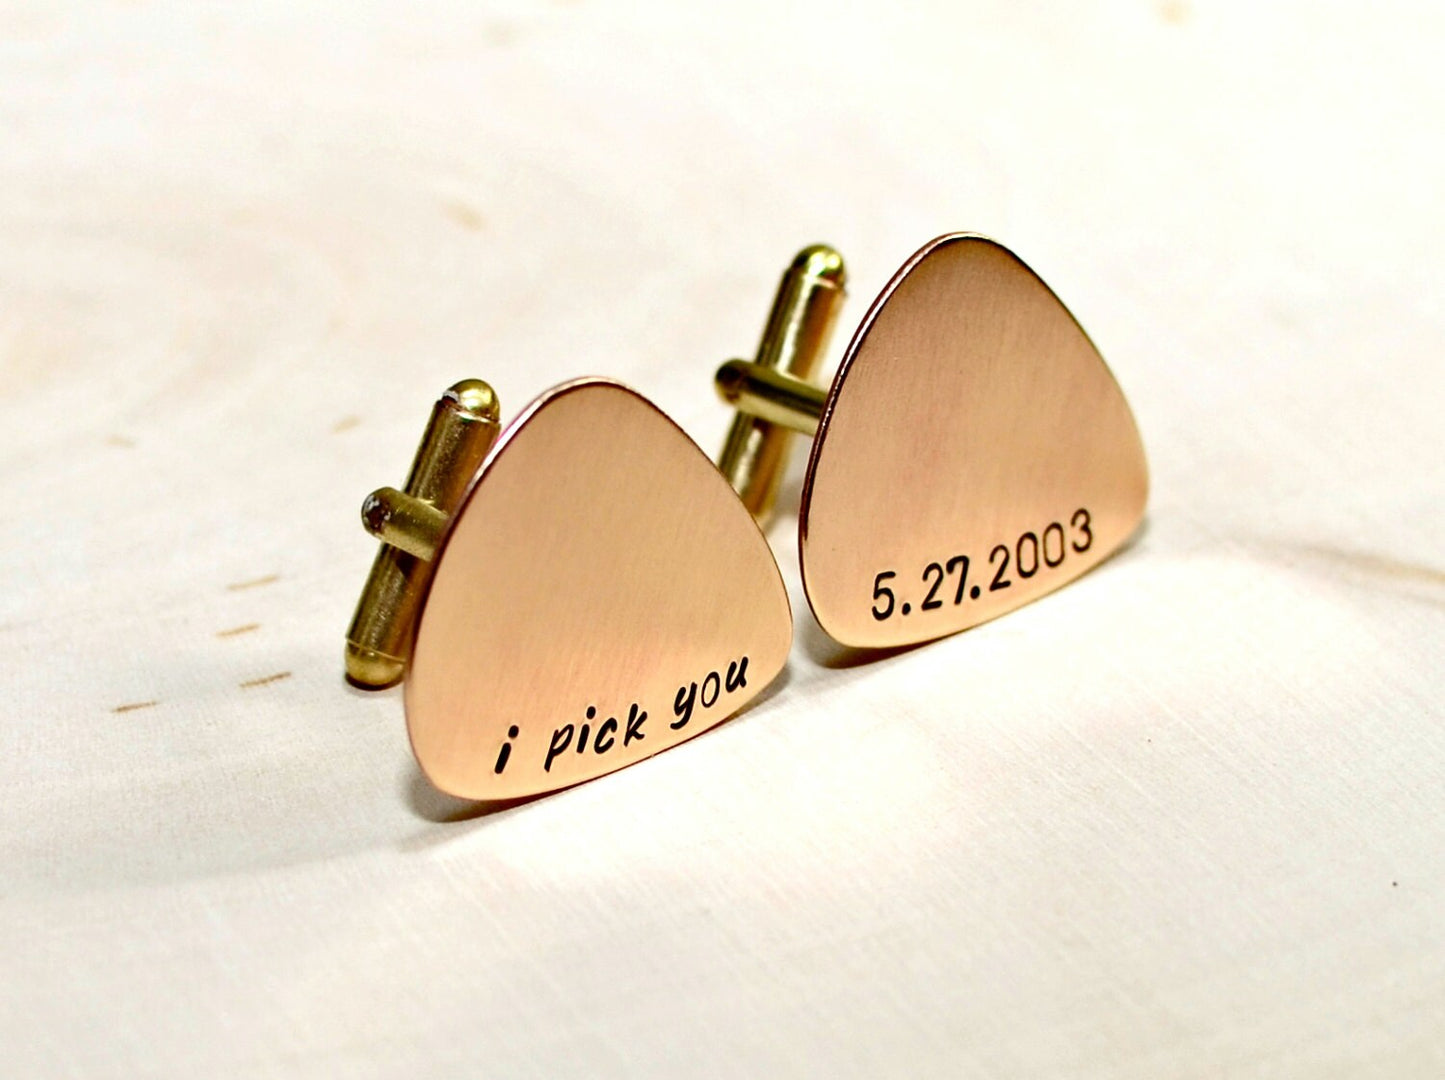 Bronze guitar pick cuff links engraved with I Pick You and wedding date